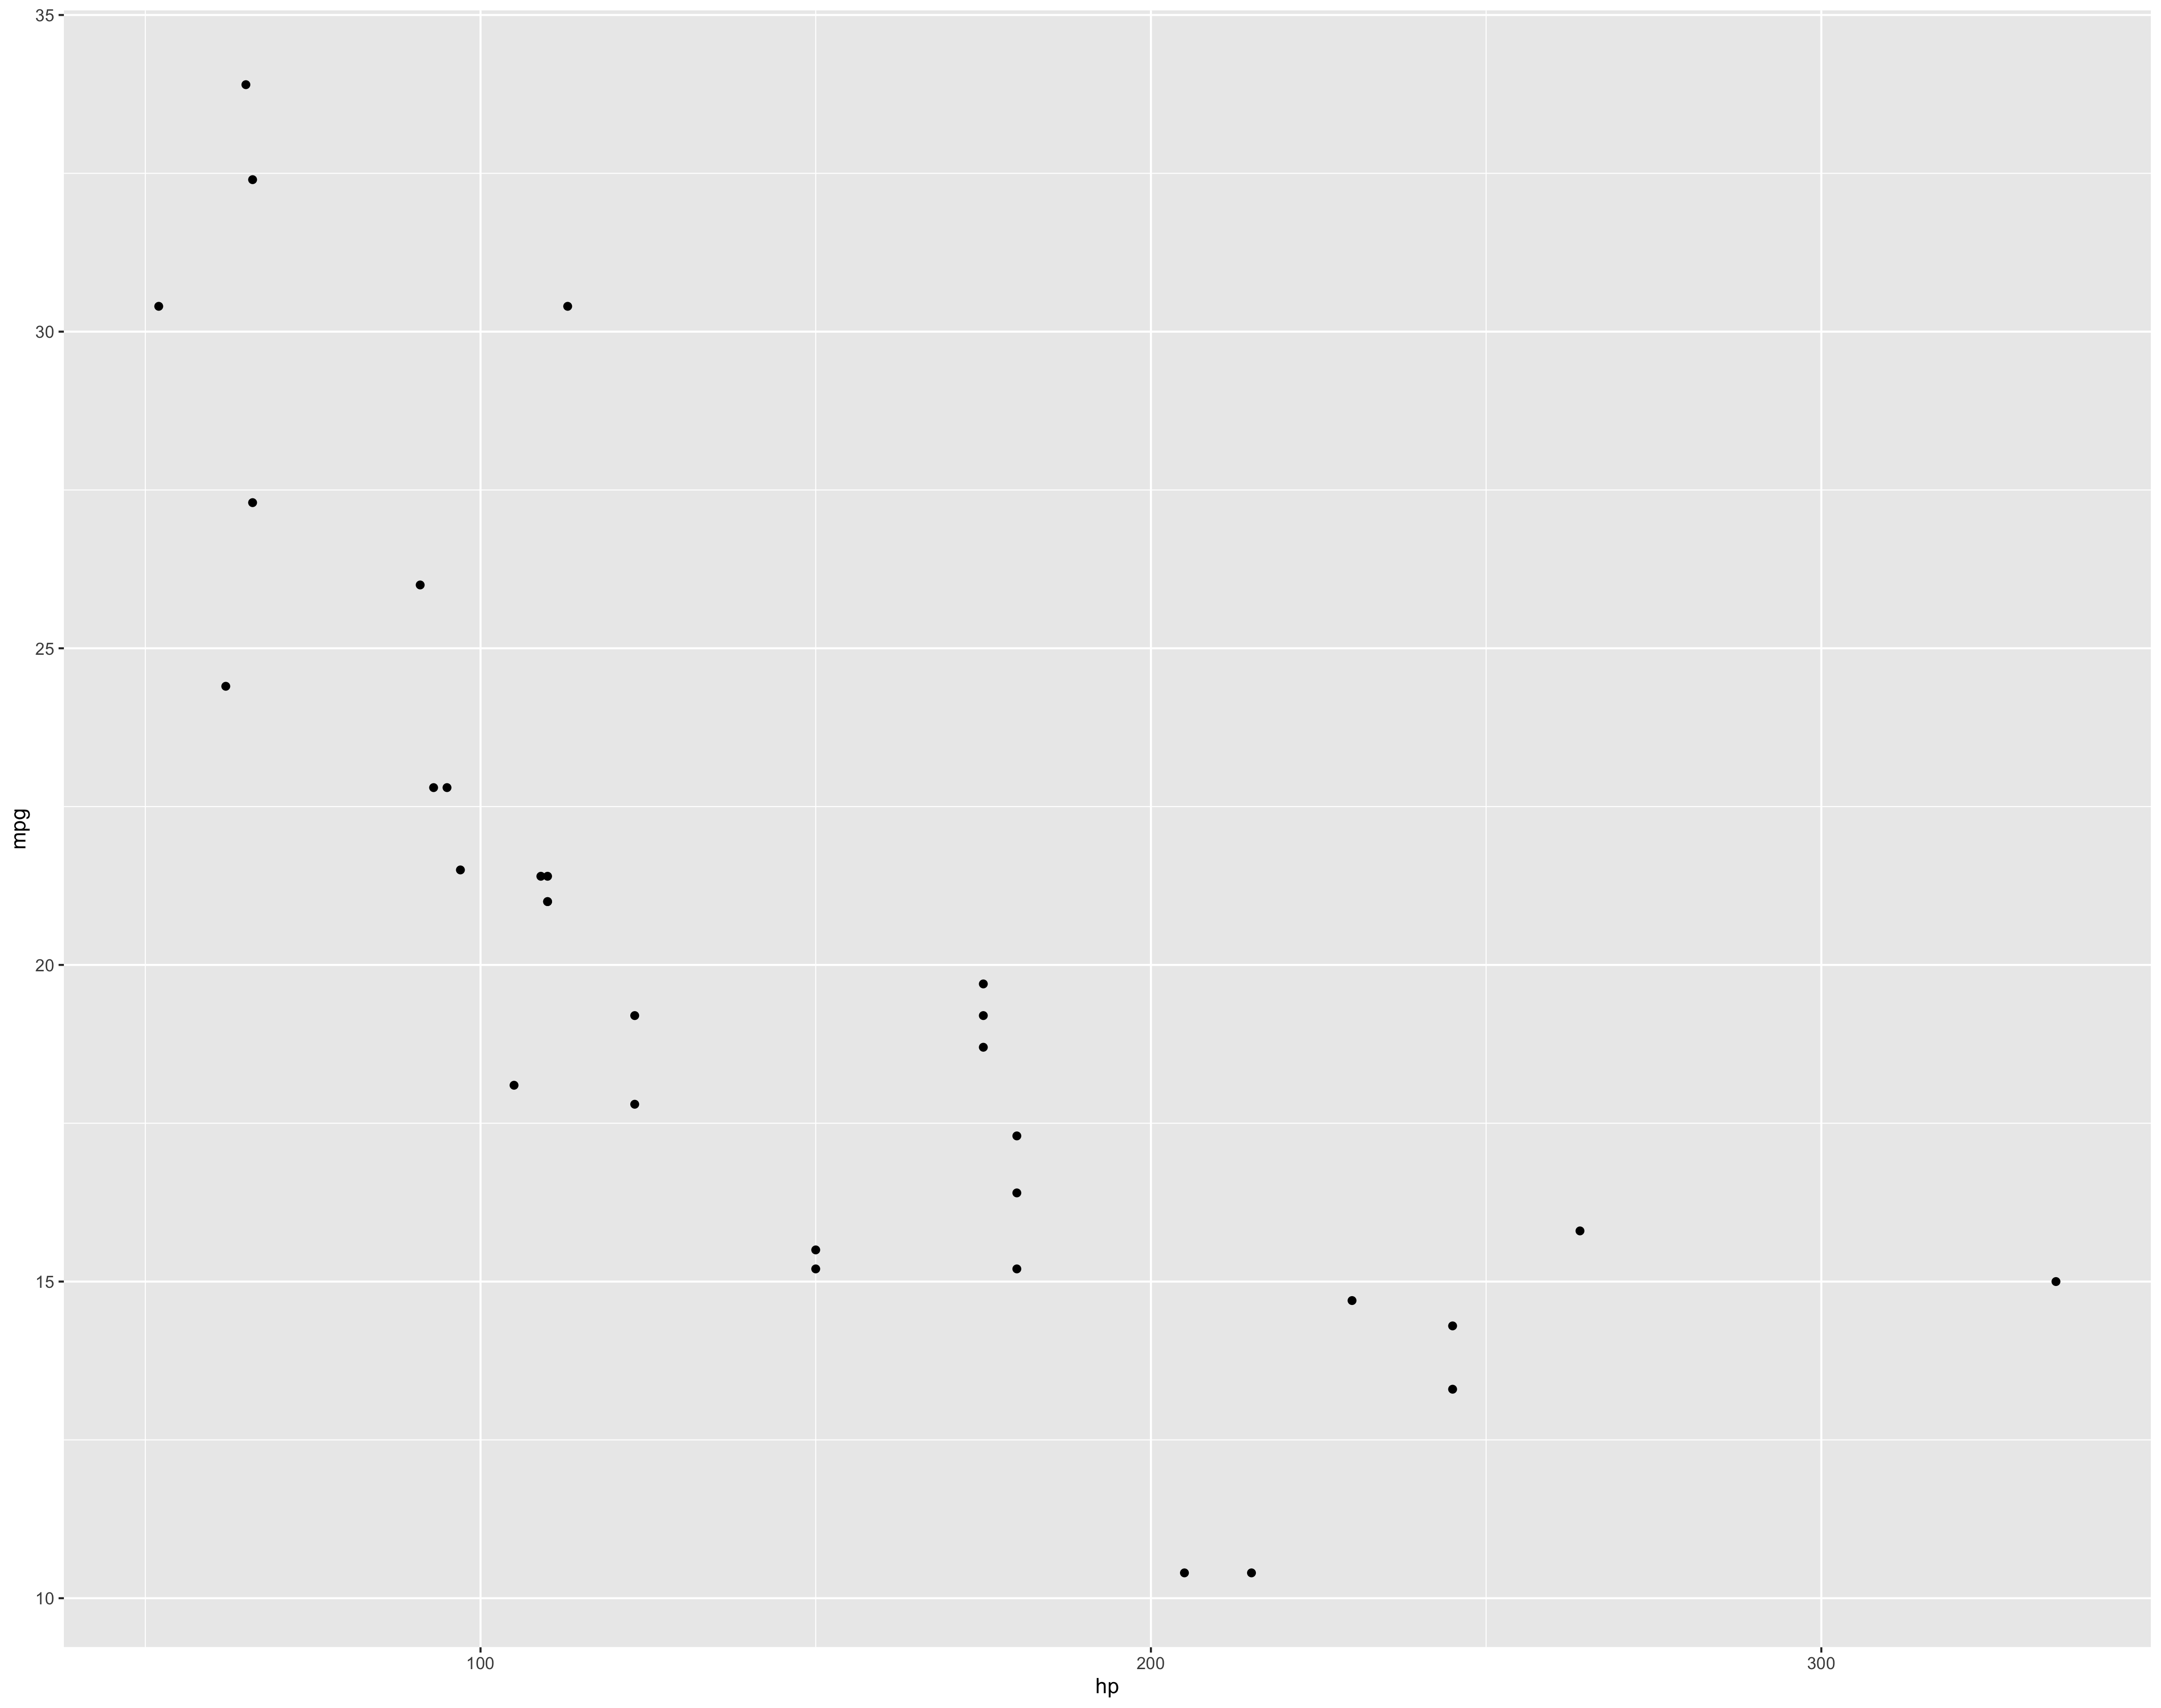 A simple scatter point plot